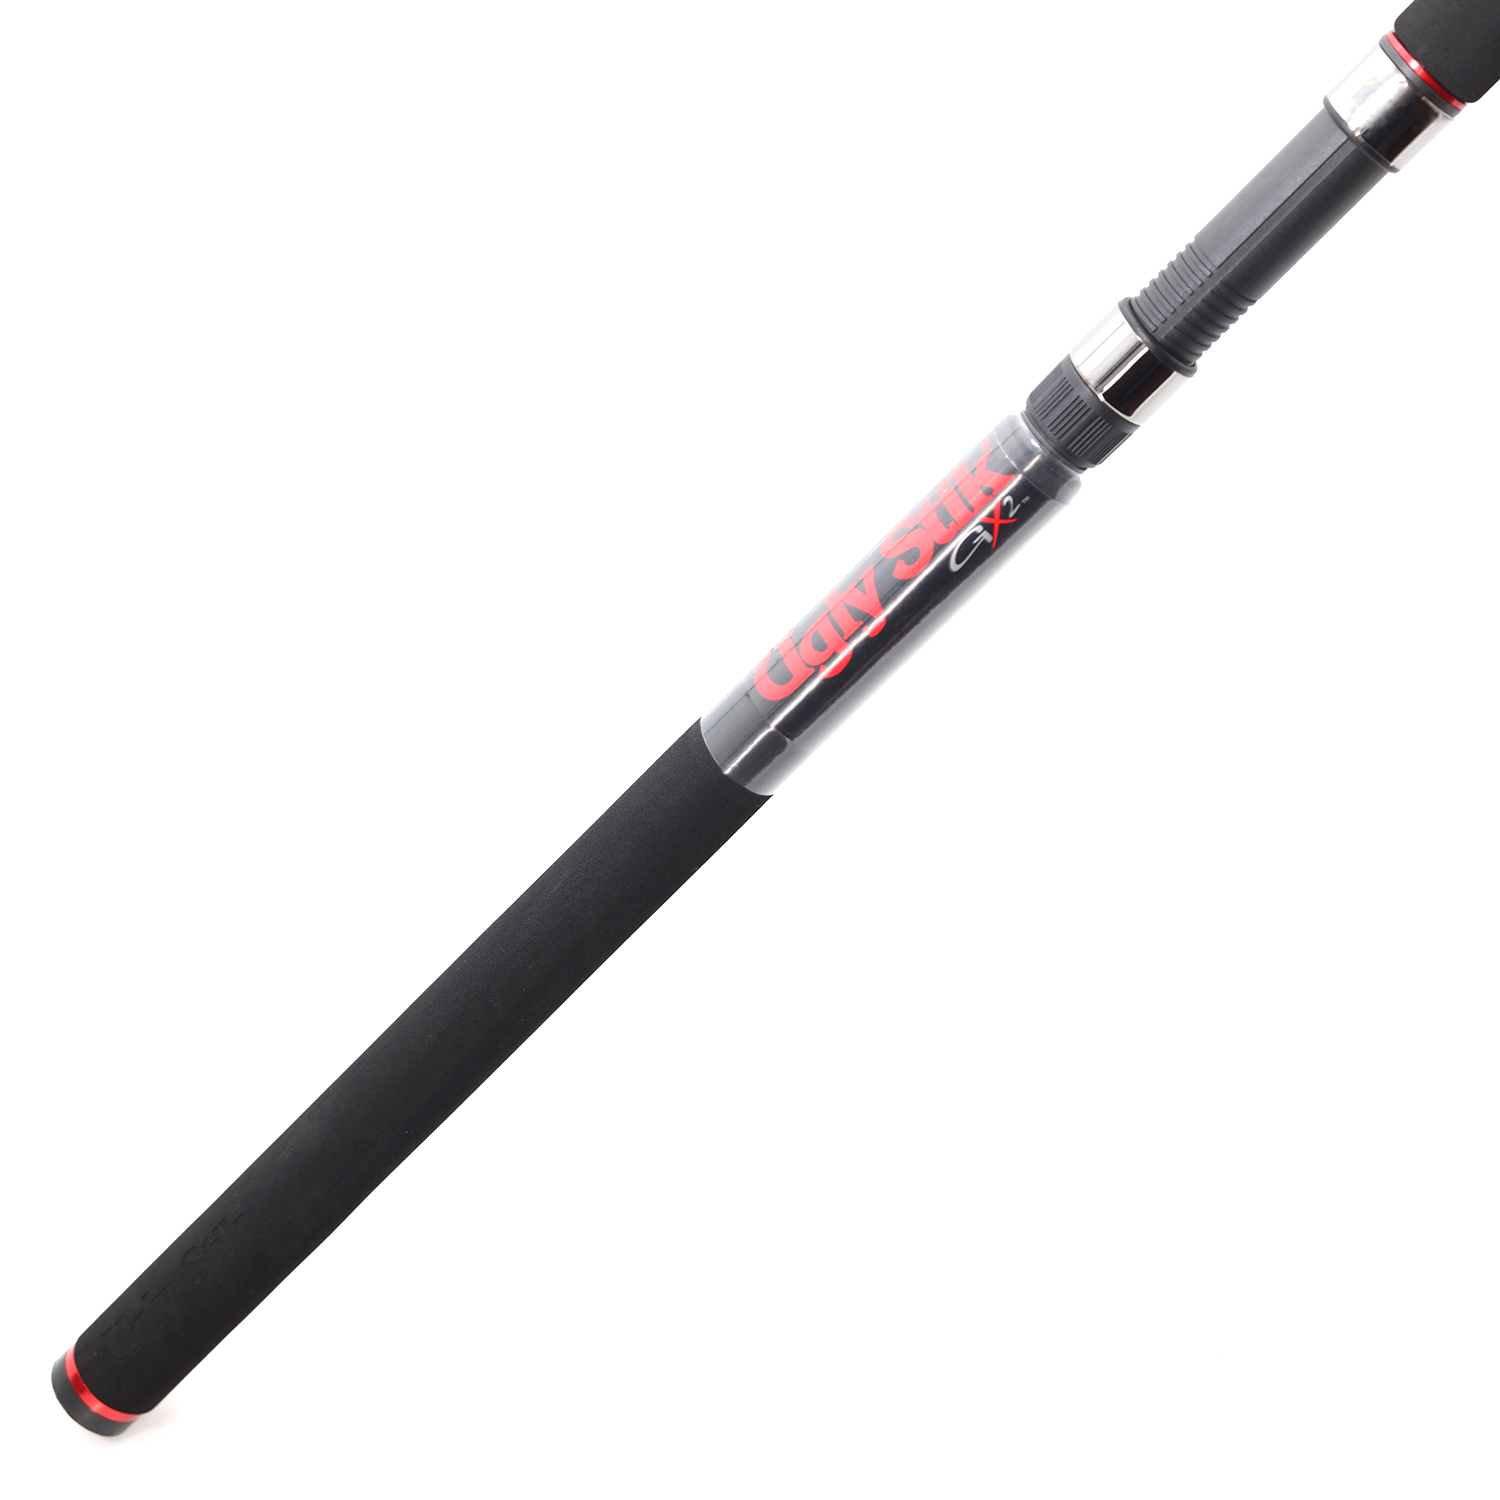 SHAKESPEARE UGLY STIK ROD GX2 - SPIN EUROPEAN EDITION 3M